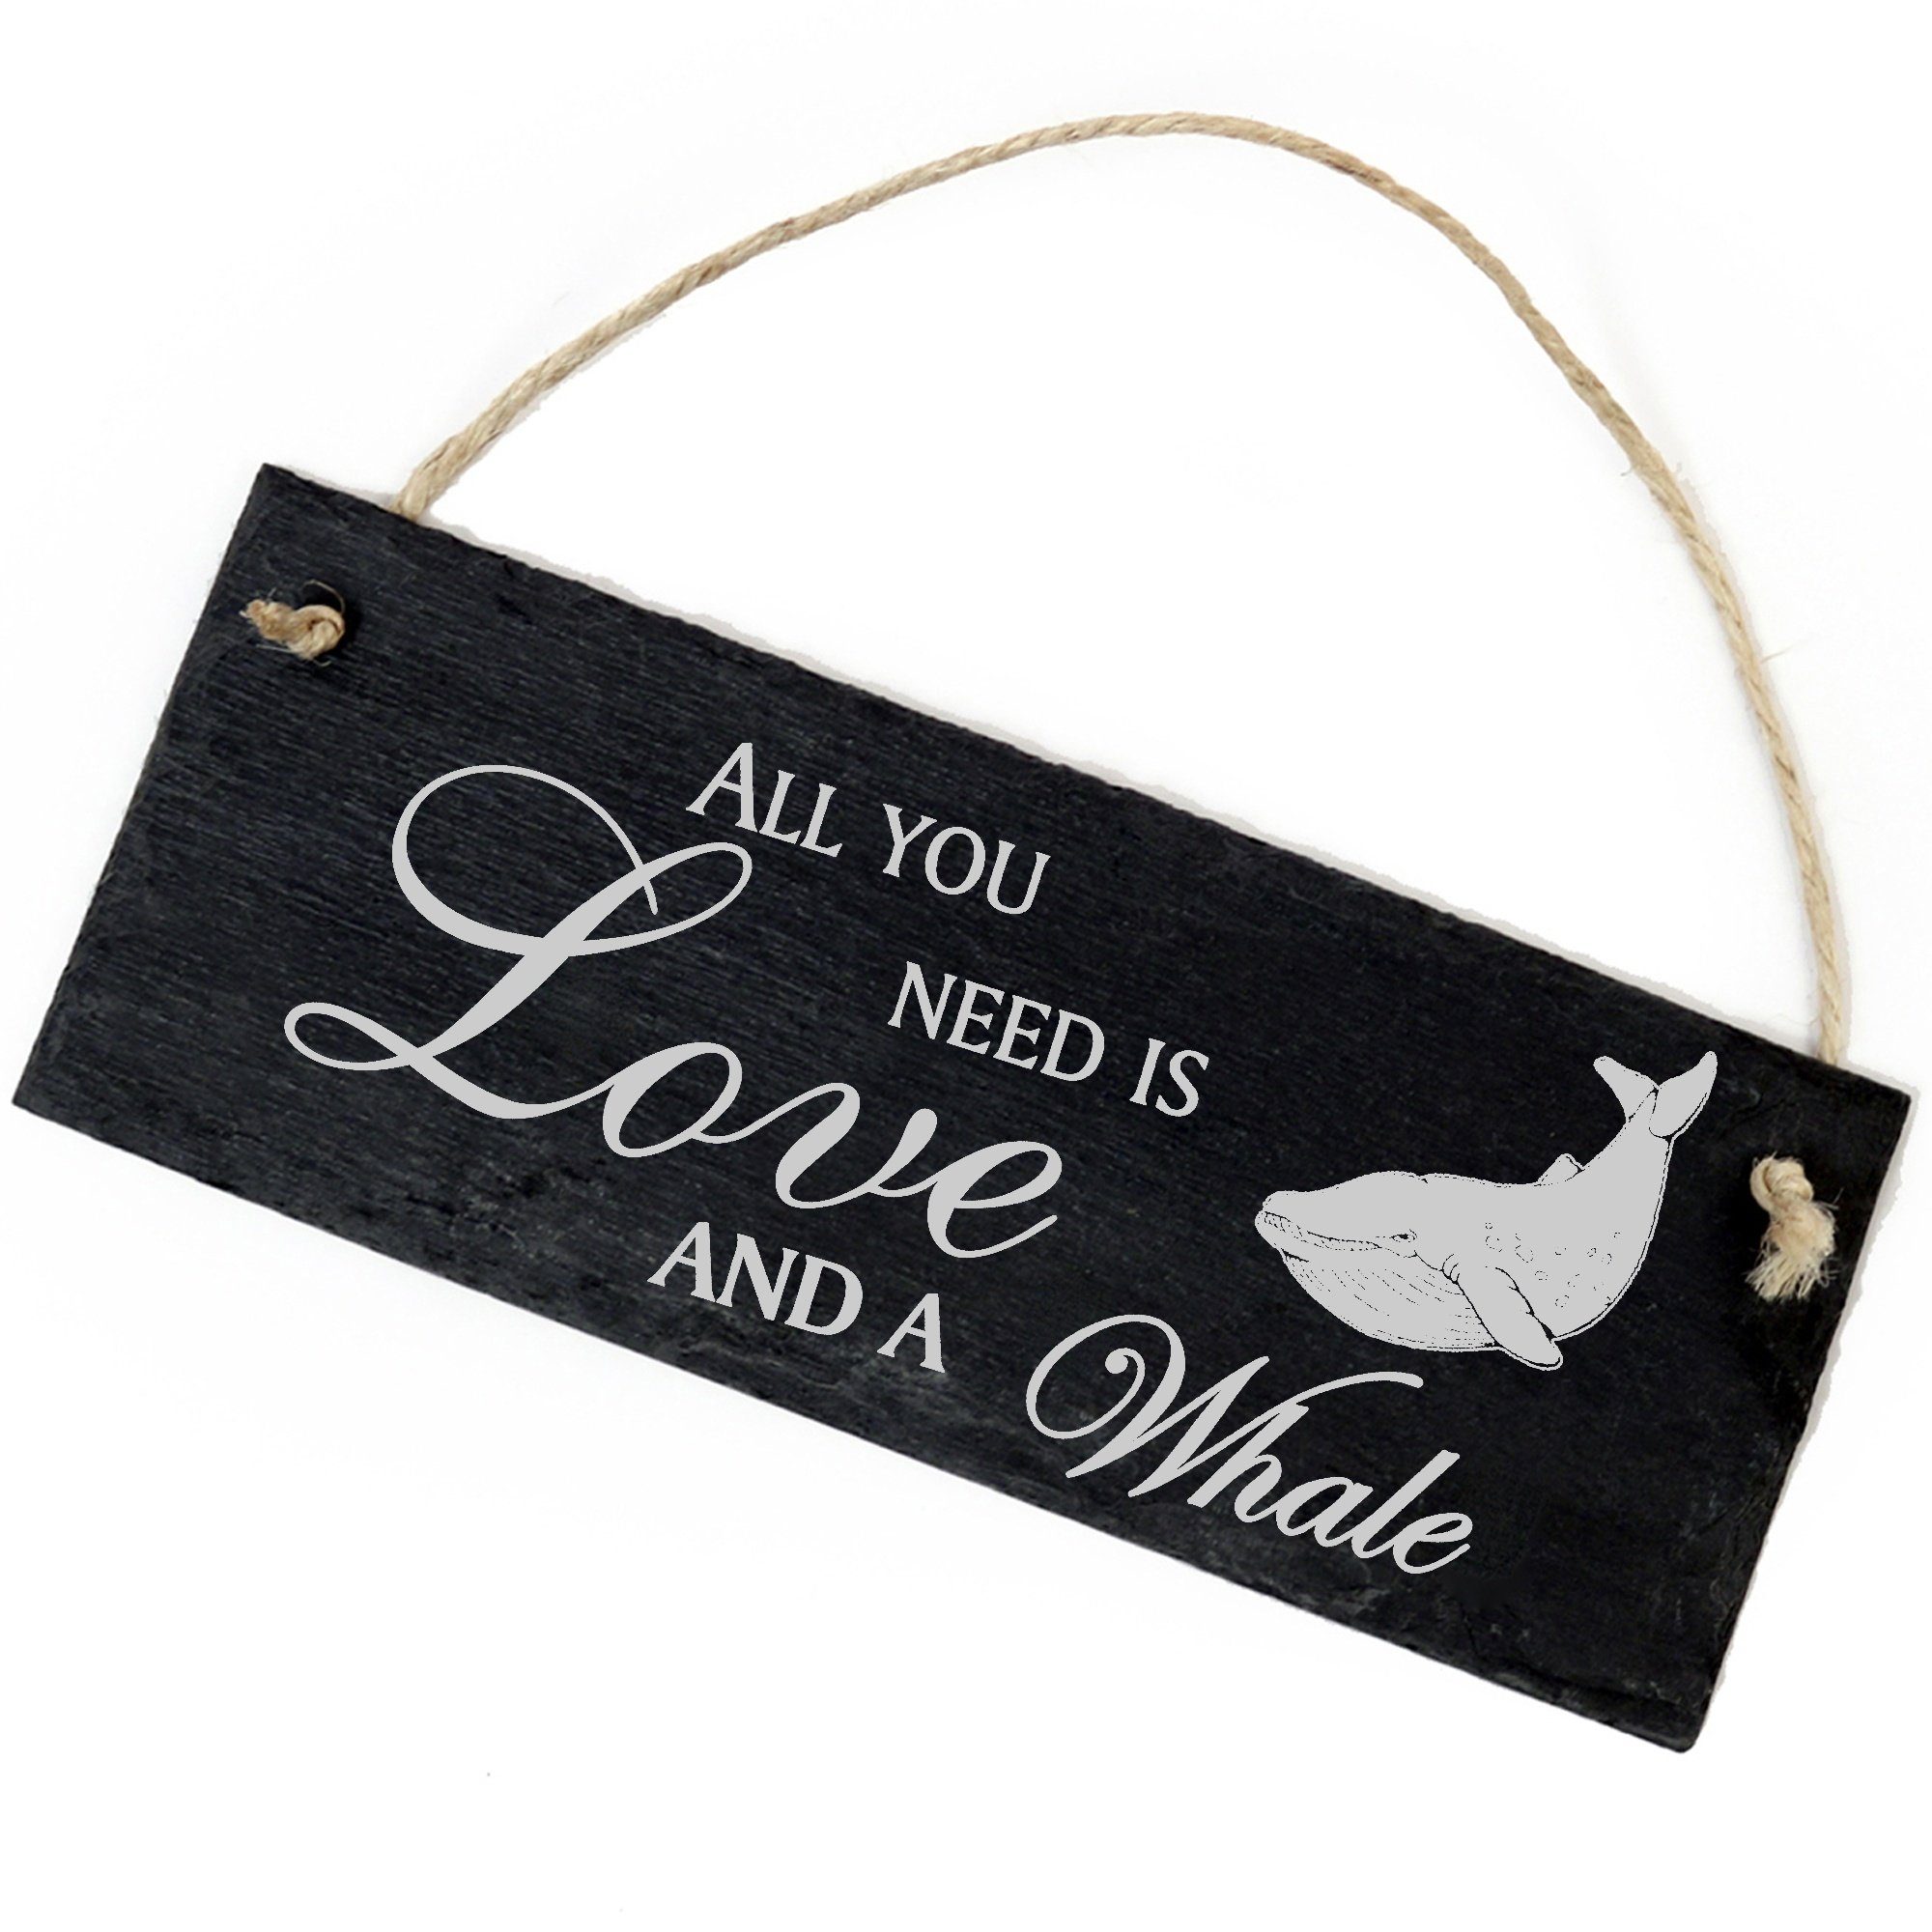 Dekolando Hängedekoration Wal 22x8cm All you need is Love and a Whale